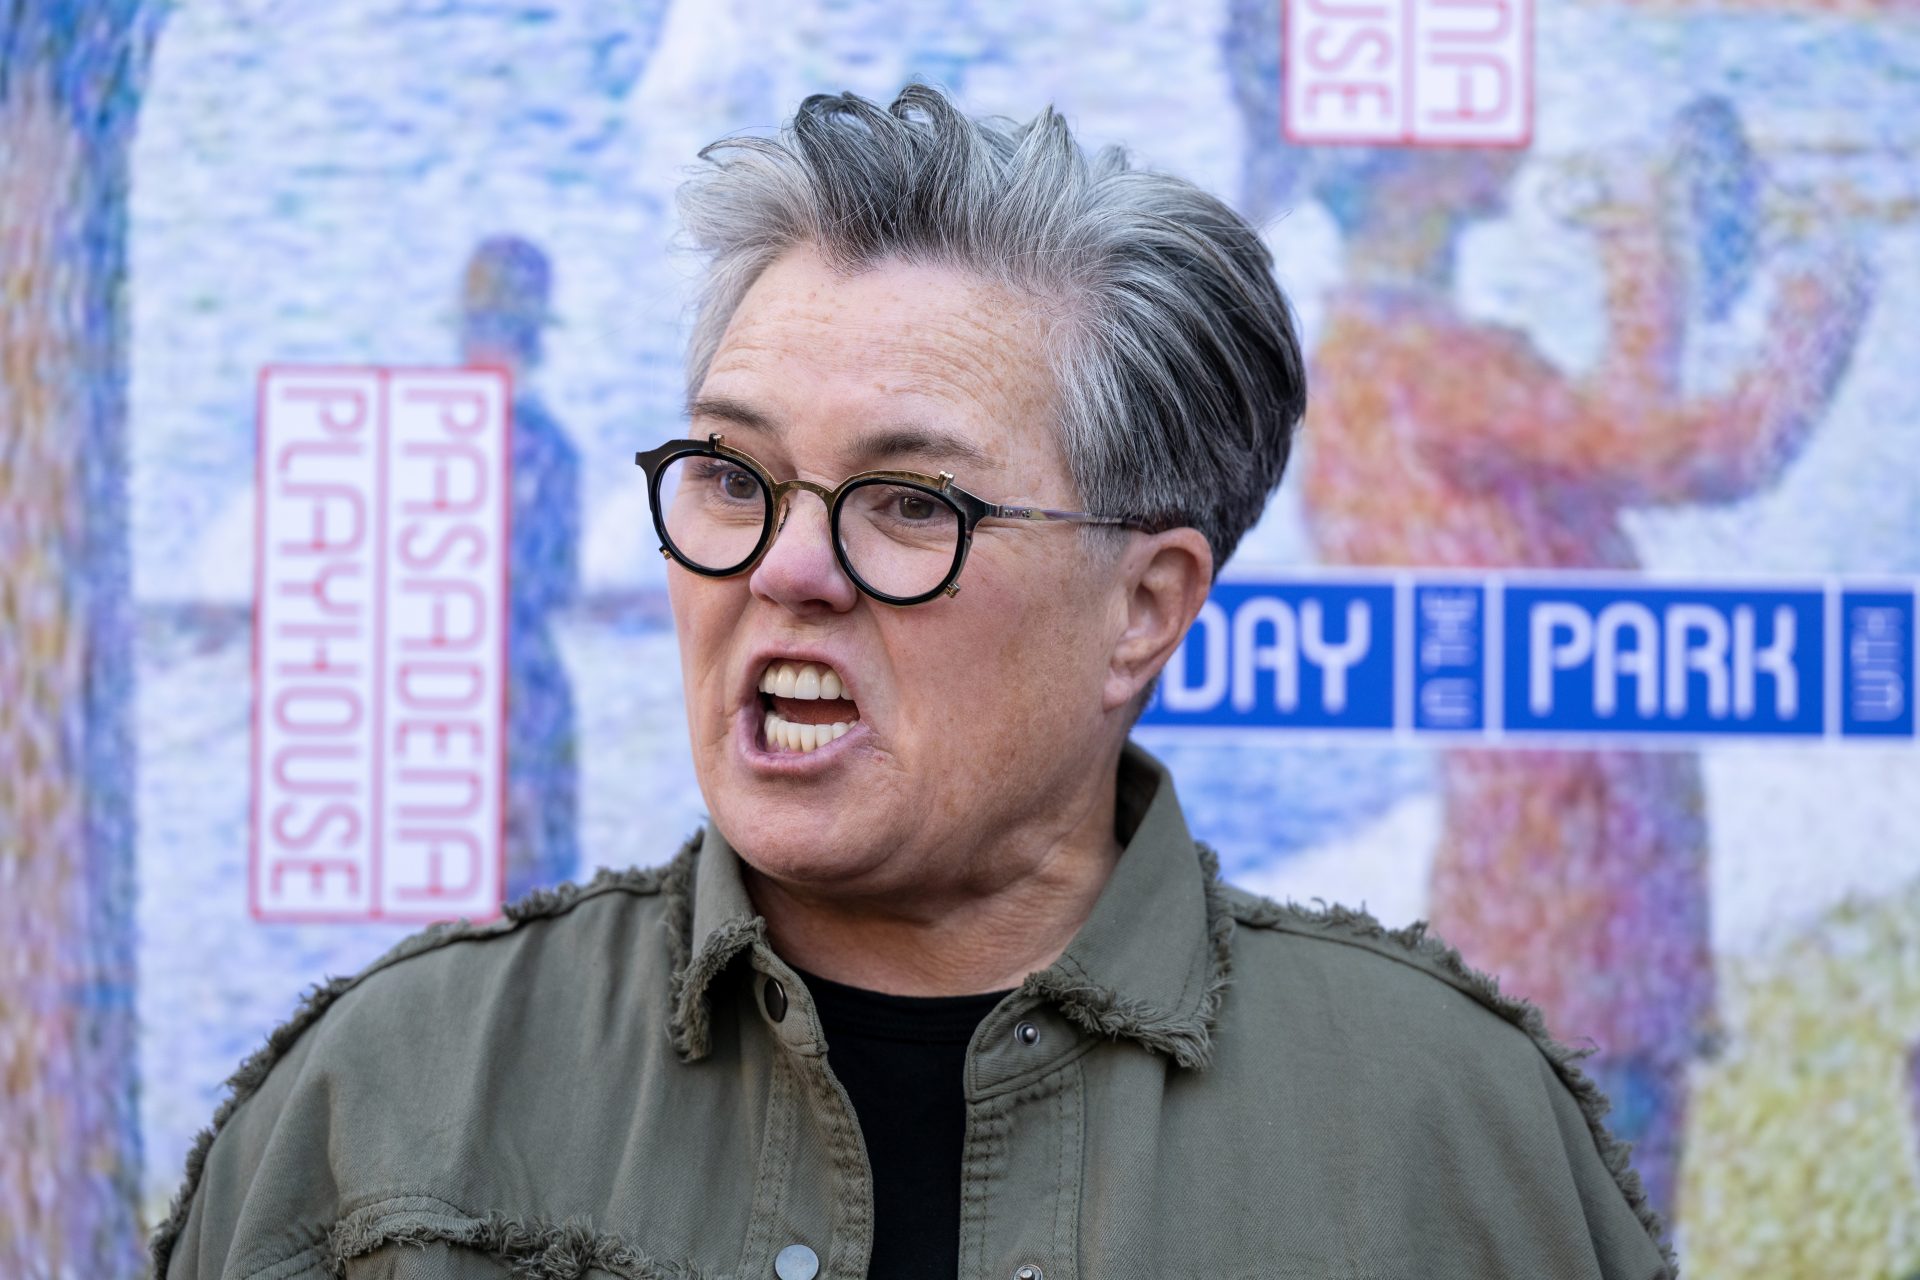 What happened to Rosie O'Donnell?